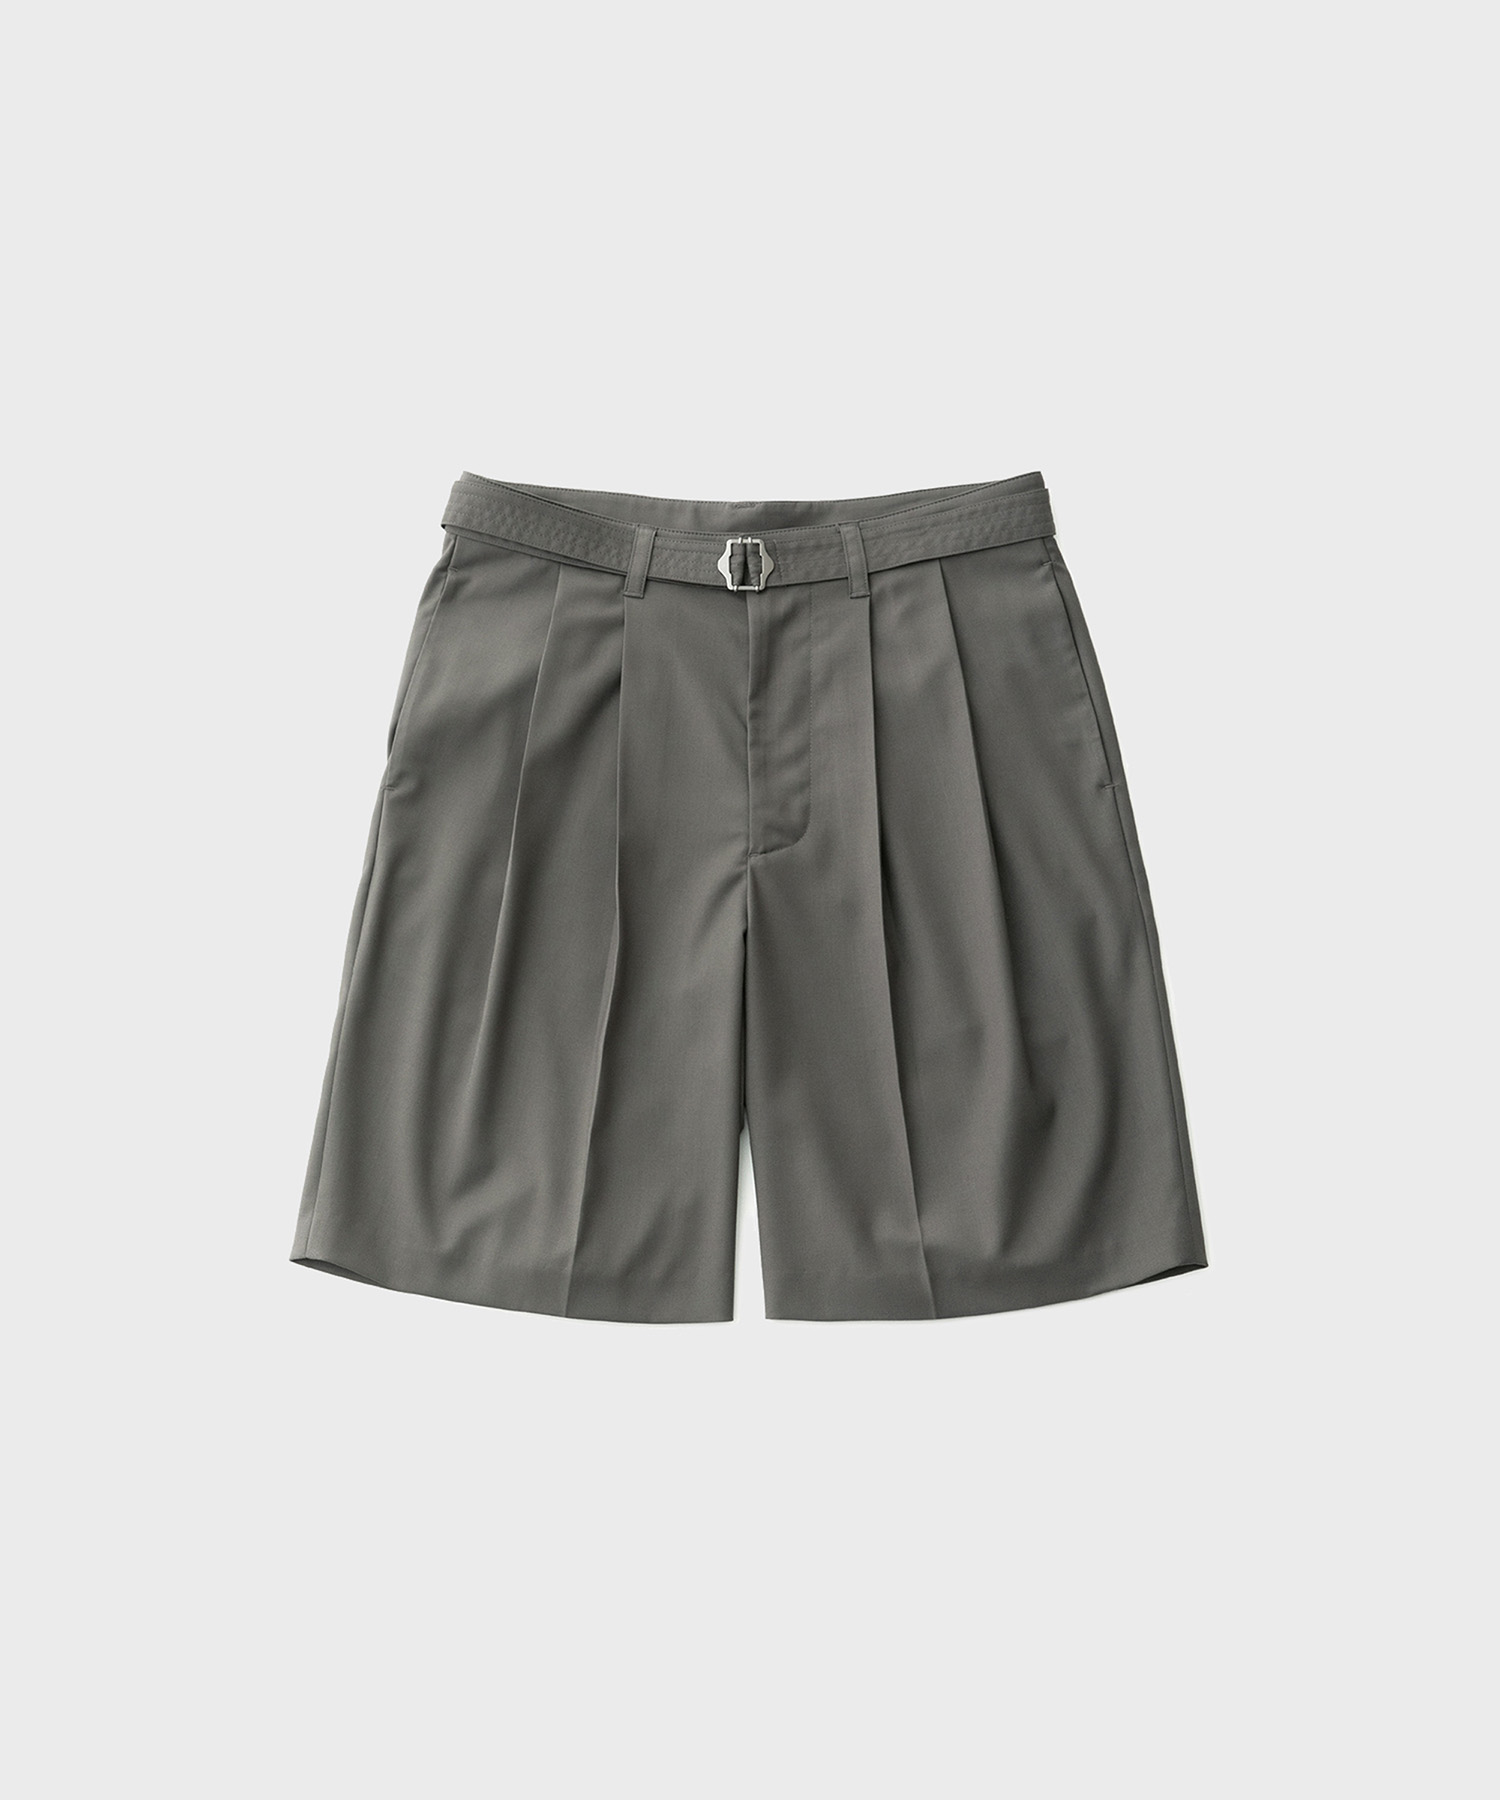 23SS Hemingway Belted Shorts (Olive Gray)